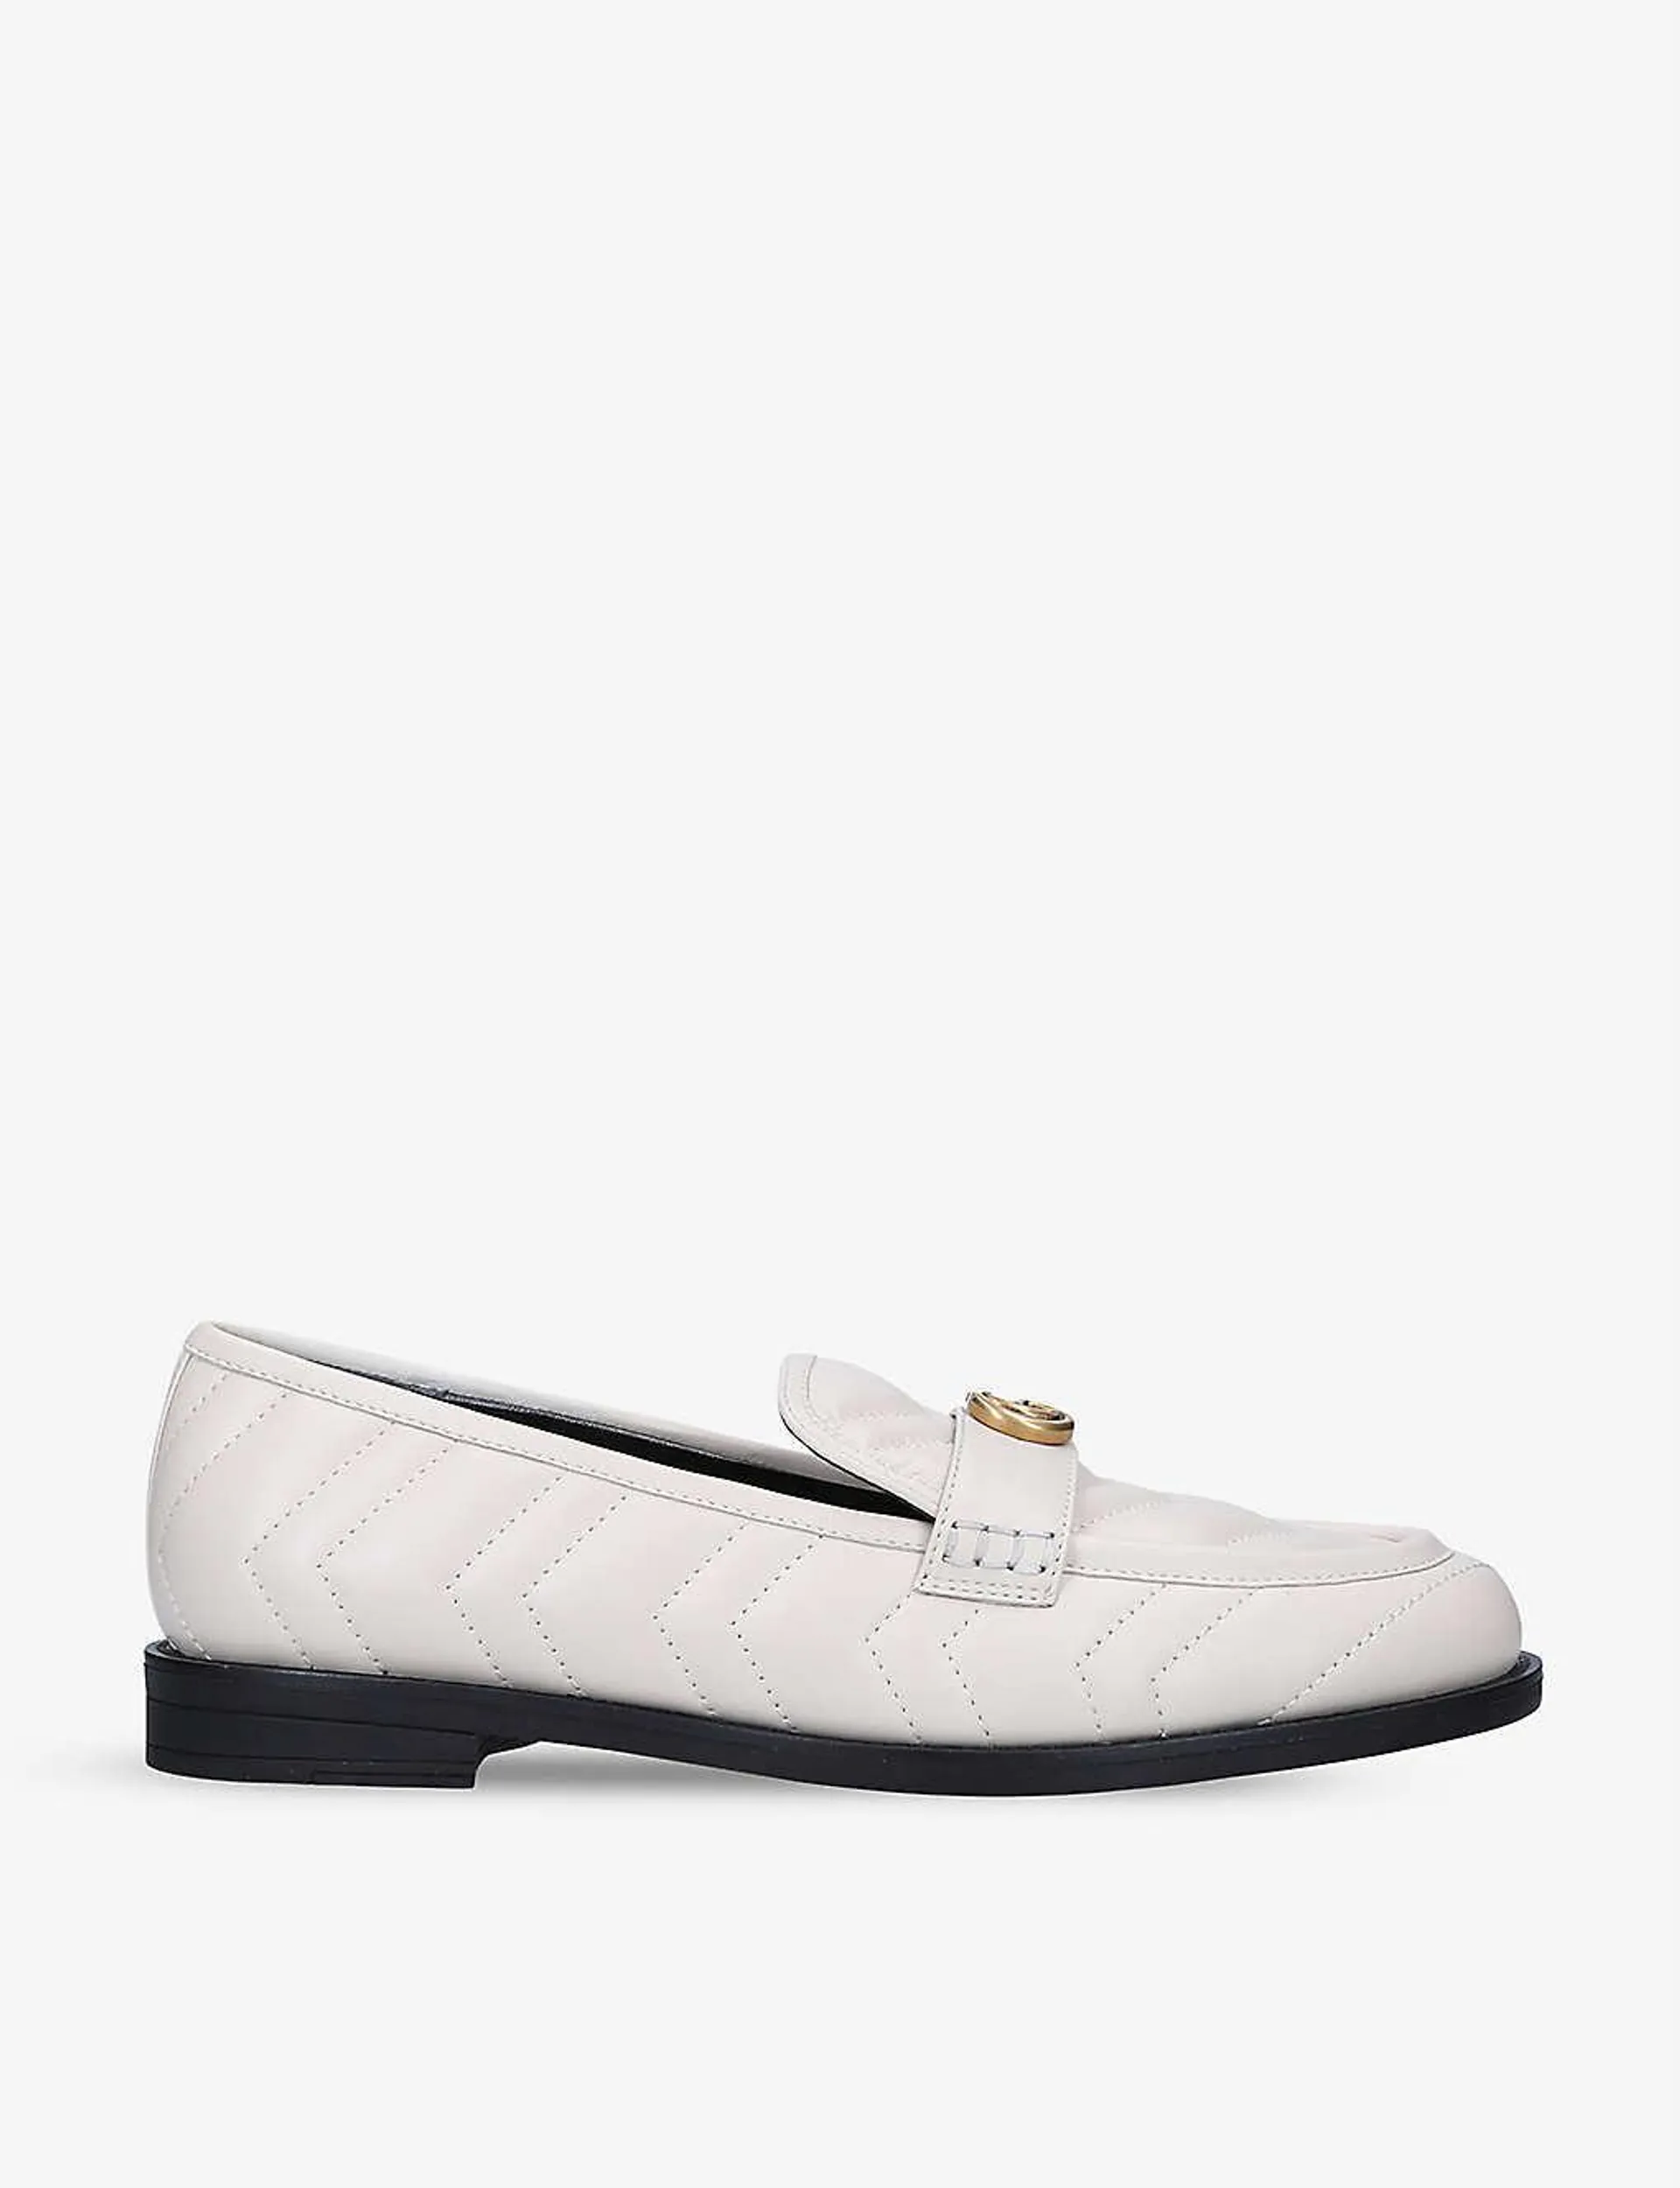 Women's Marmont leather moccasins